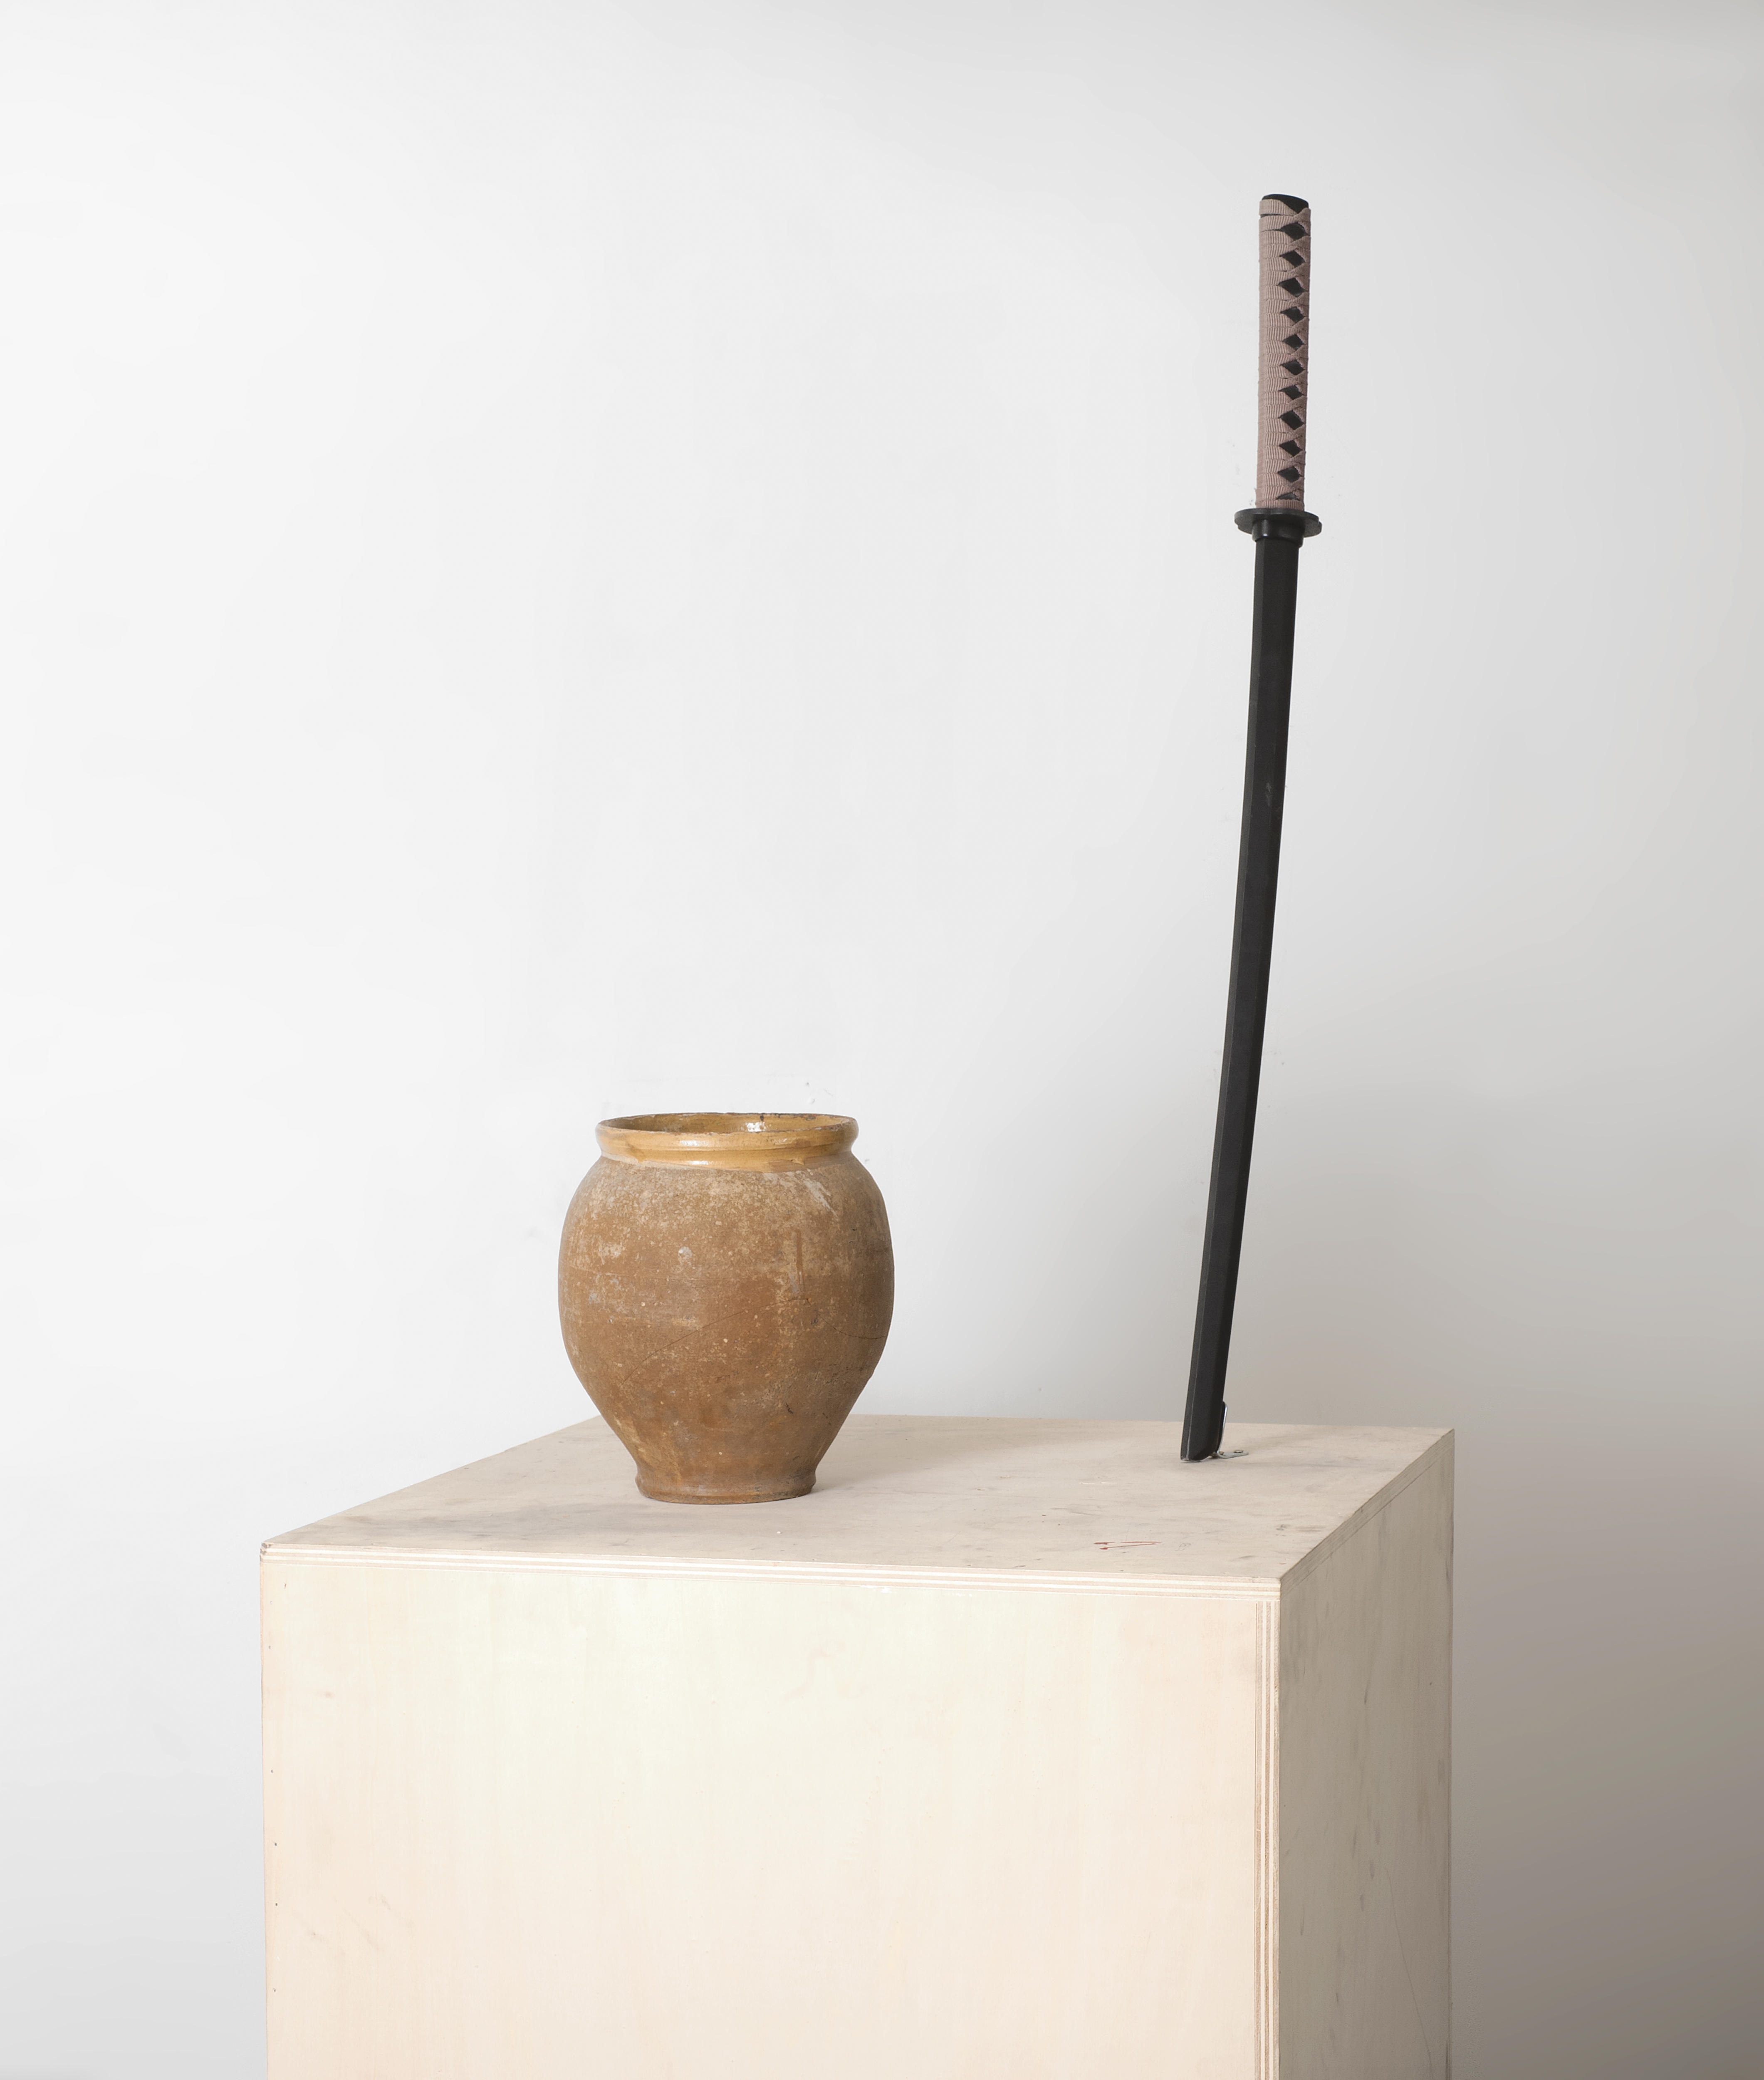 The Vase and the Sword